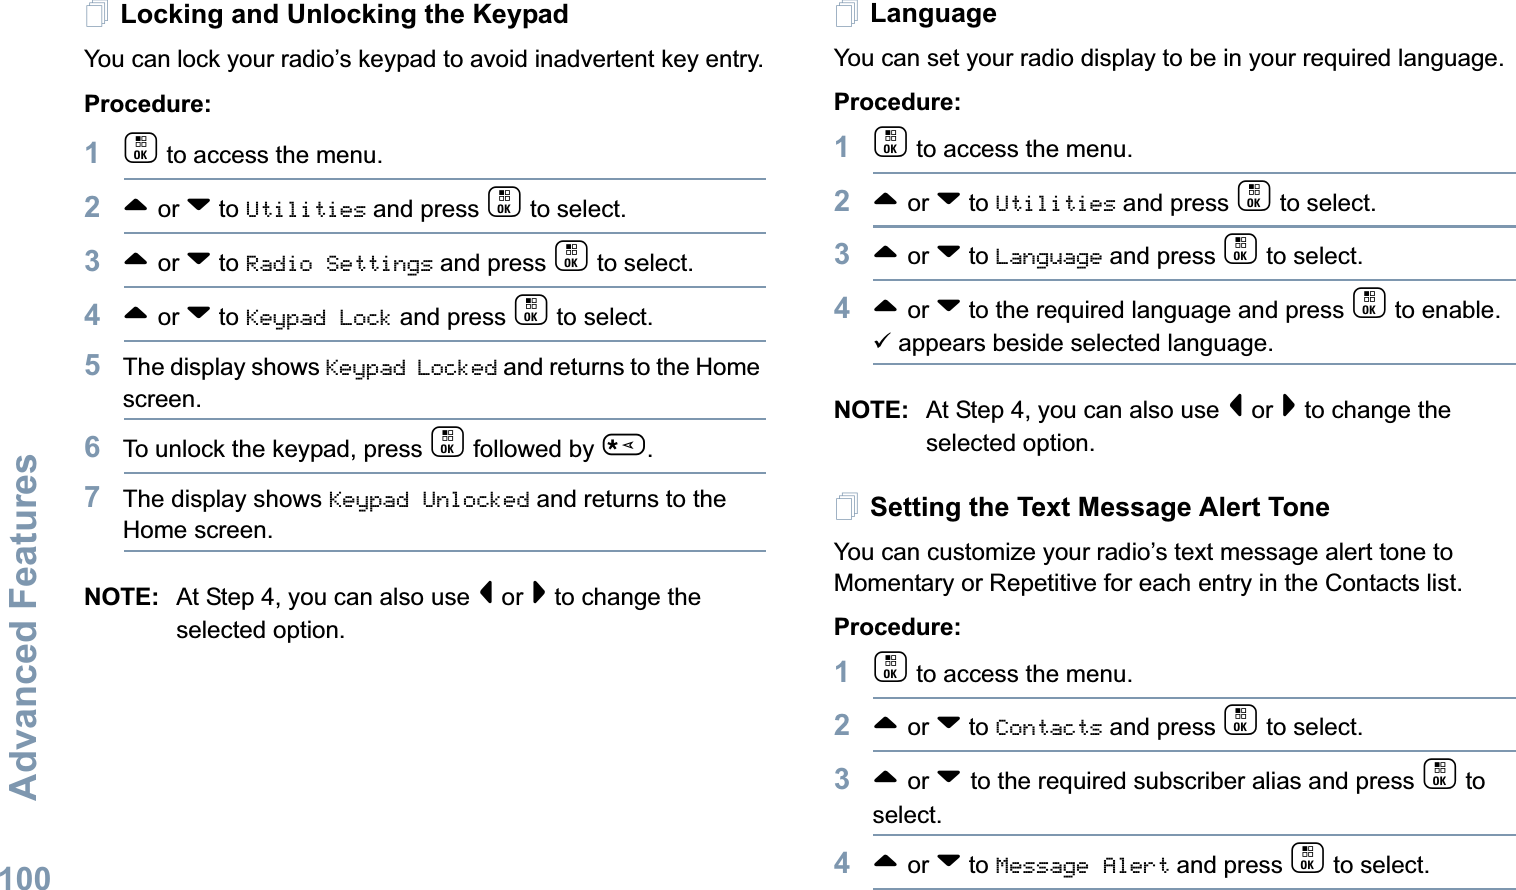 Advanced FeaturesEnglish100Locking and Unlocking the KeypadYou can lock your radio’s keypad to avoid inadvertent key entry.Procedure:1c to access the menu.2^ or v to Utilities and press c to select.3^ or v to Radio Settings and press c to select.4^ or v to Keypad Lock and press c to select.5The display shows Keypad Locked and returns to the Home screen.6To unlock the keypad, press c followed by *.7The display shows Keypad Unlocked and returns to the Home screen.NOTE: At Step 4, you can also use &lt; or &gt; to change the selected option.LanguageYou can set your radio display to be in your required language. Procedure: 1c to access the menu.2^ or v to Utilities and press c to select.3^ or v to Language and press c to select.4^ or v to the required language and press c to enable. 9 appears beside selected language.NOTE: At Step 4, you can also use &lt; or &gt; to change the selected option.Setting the Text Message Alert ToneYou can customize your radio’s text message alert tone to Momentary or Repetitive for each entry in the Contacts list.Procedure: 1c to access the menu.2^ or v to Contacts and press c to select.3^ or v to the required subscriber alias and press c to select.4^ or v to Message Alert and press c to select.